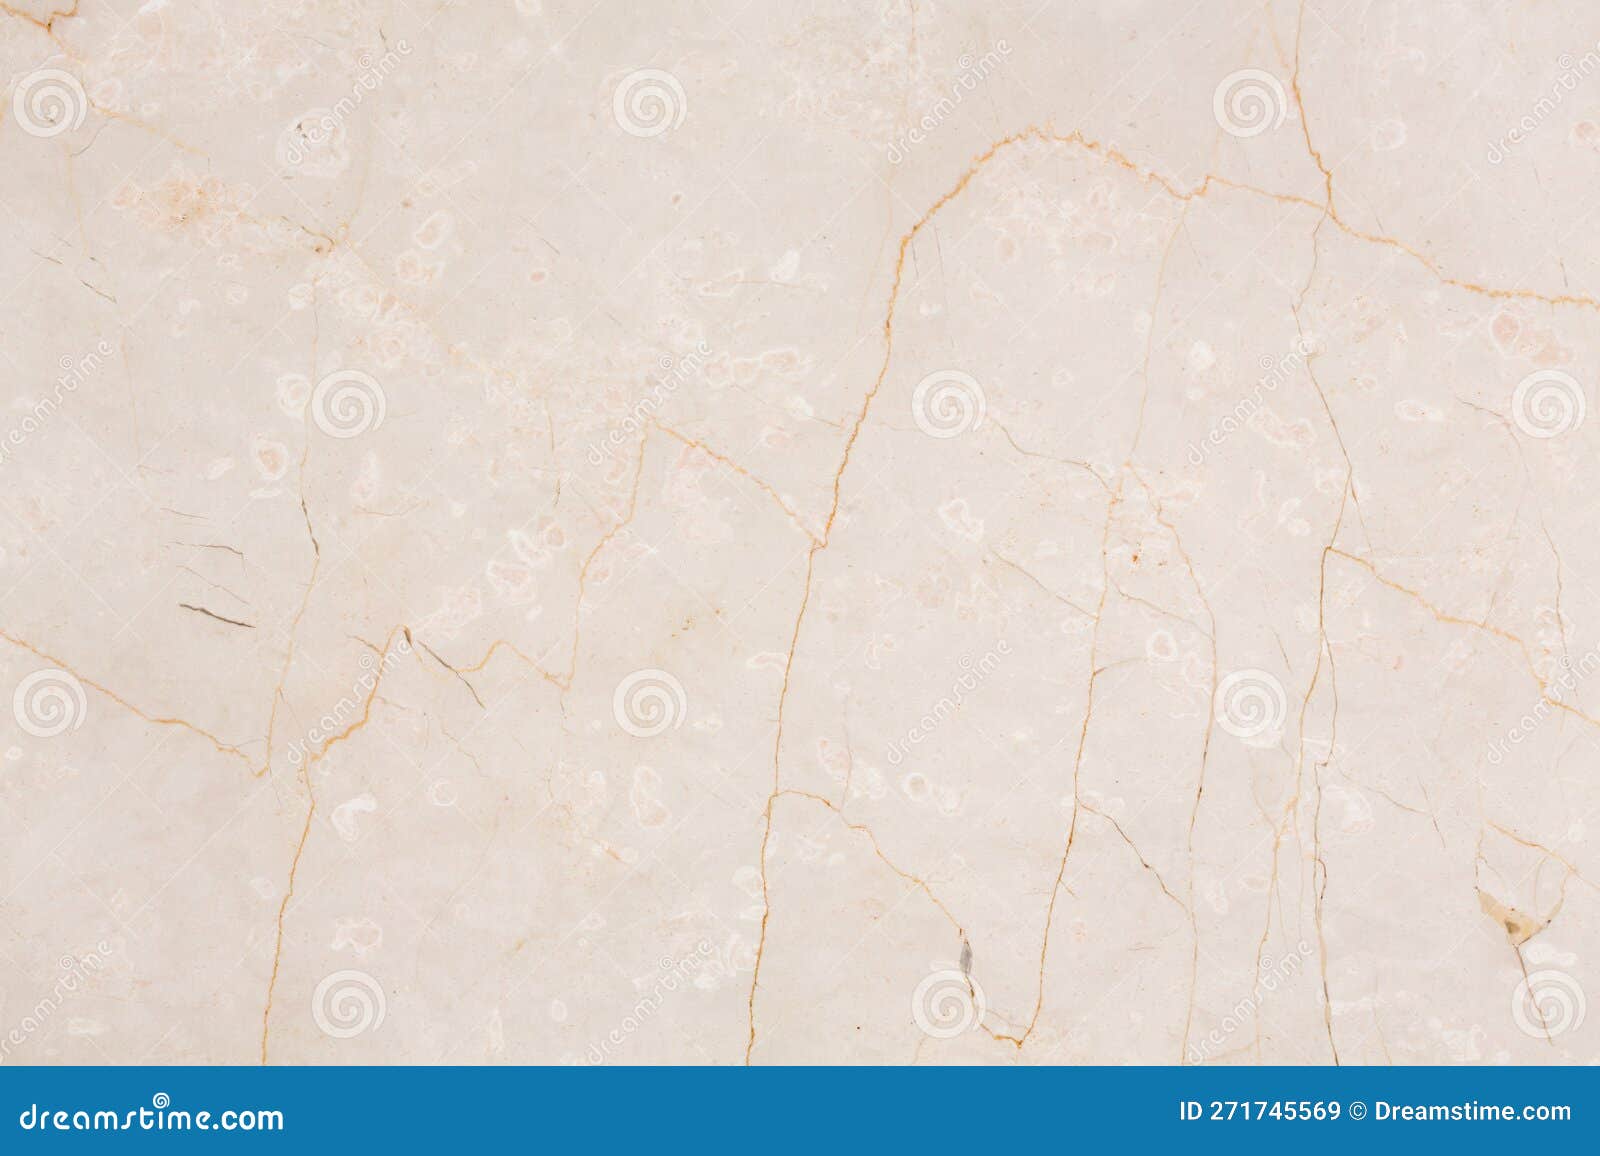 botticino semiclassico natural beige marble slab stone texture. patterned material for luxury modern interior, 3d